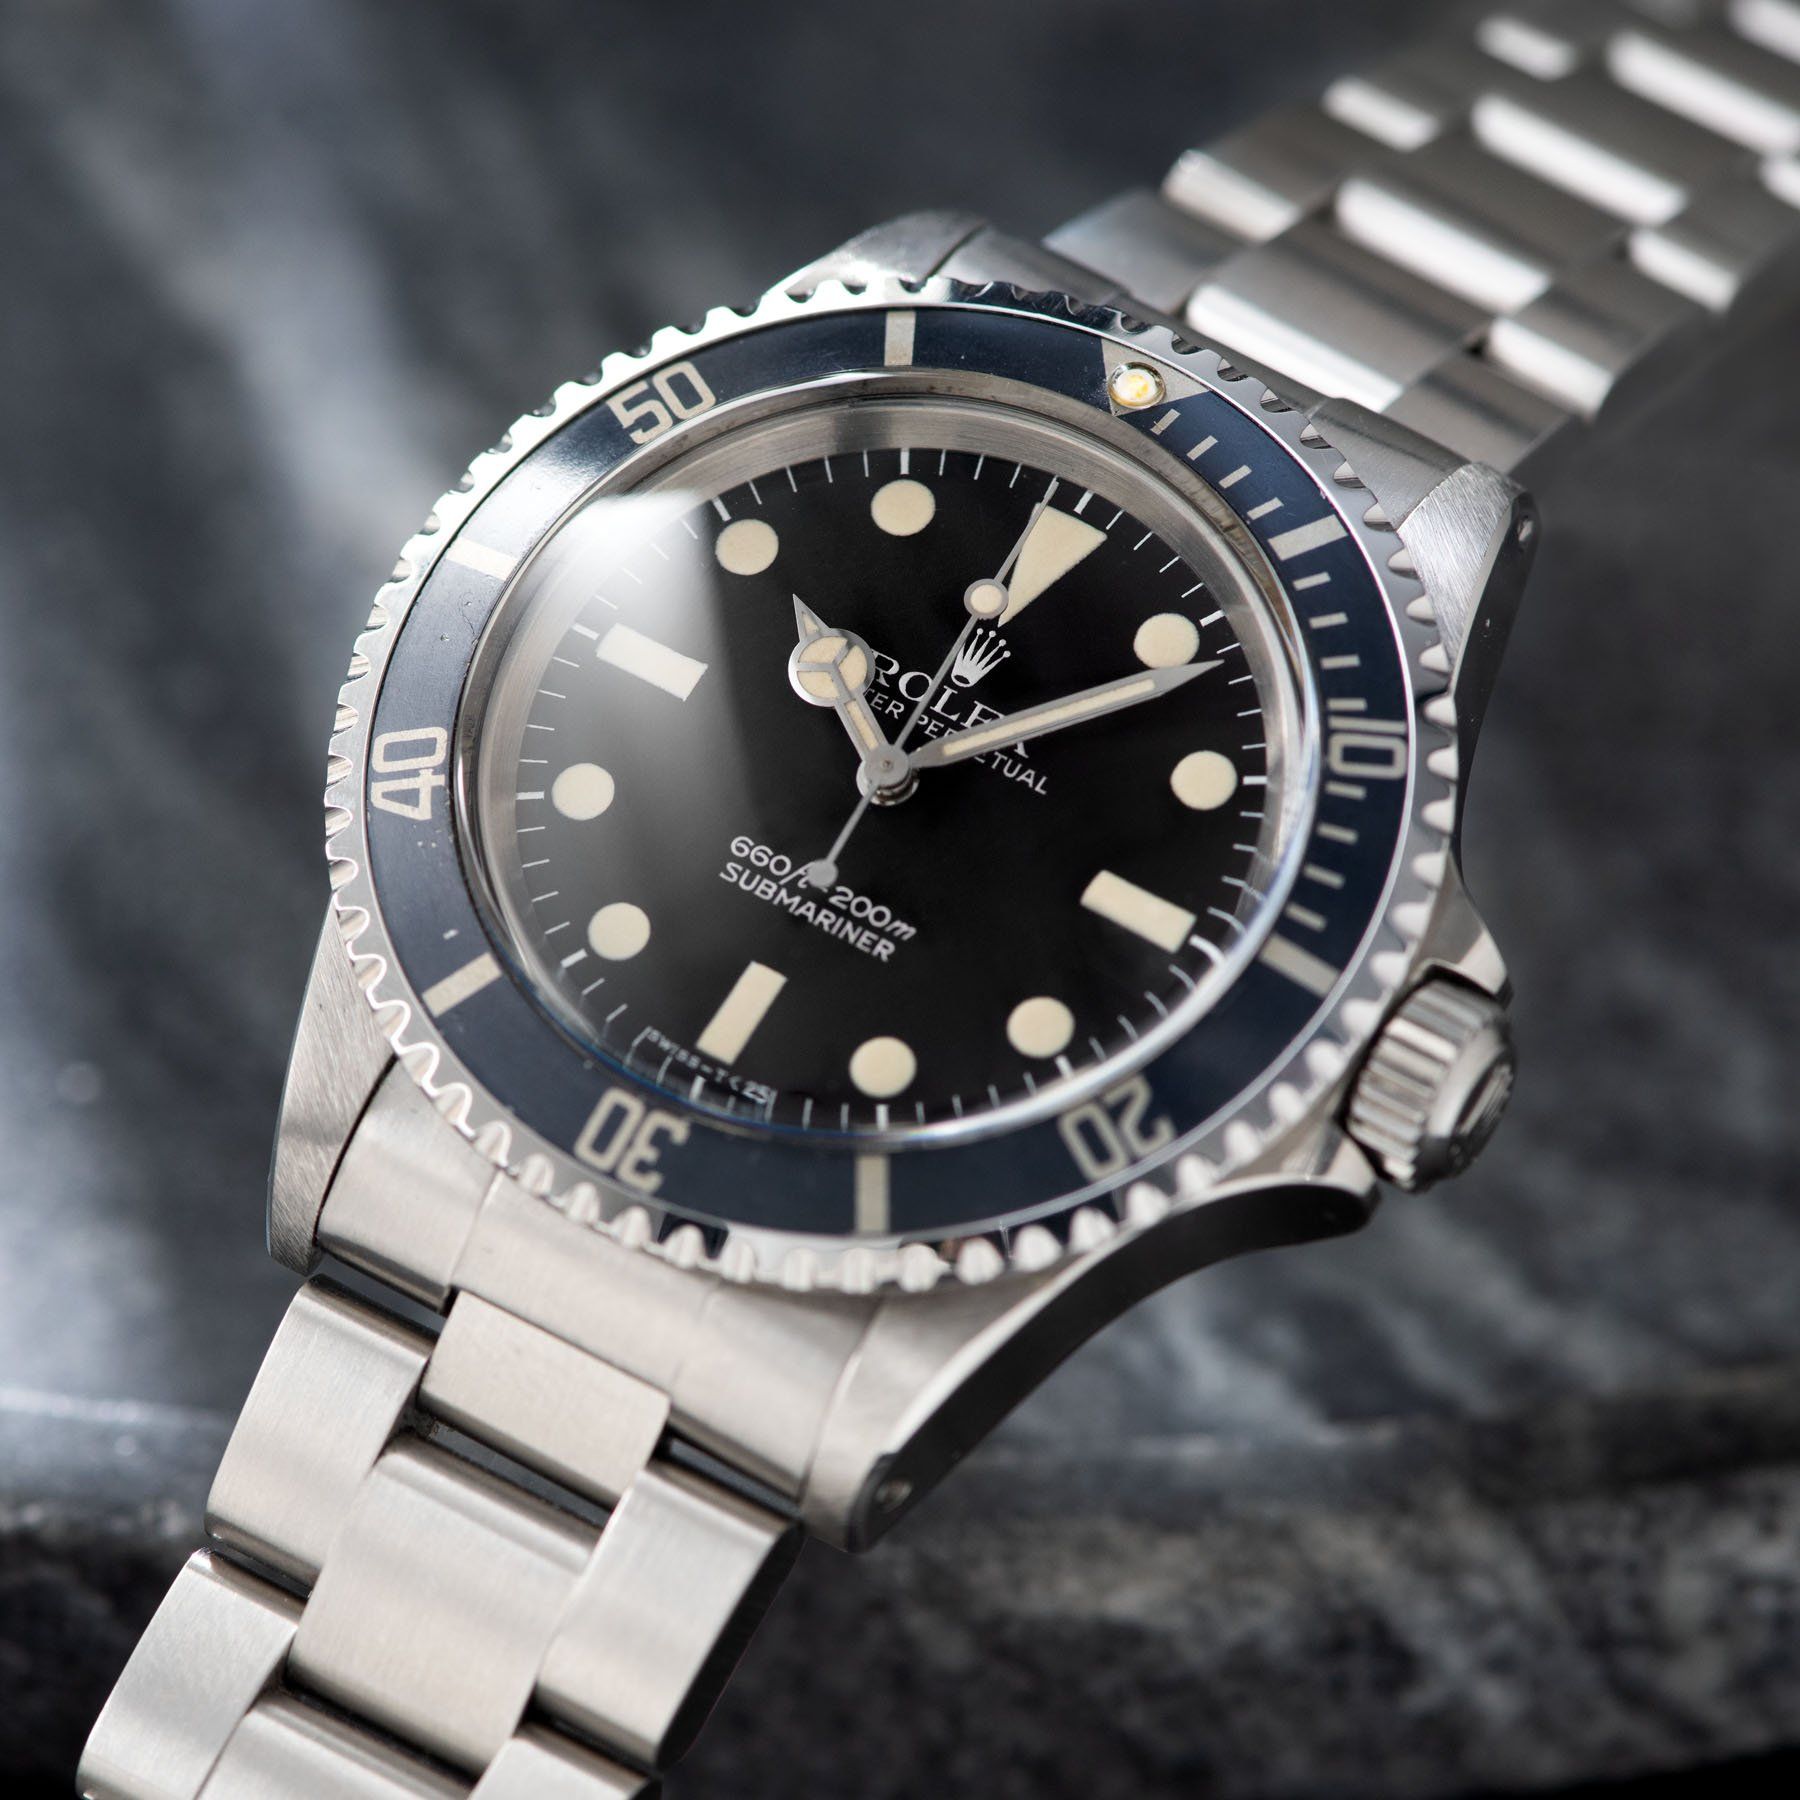 Rolex Submariner Mk 1 Maxi 5513 Box and Papers